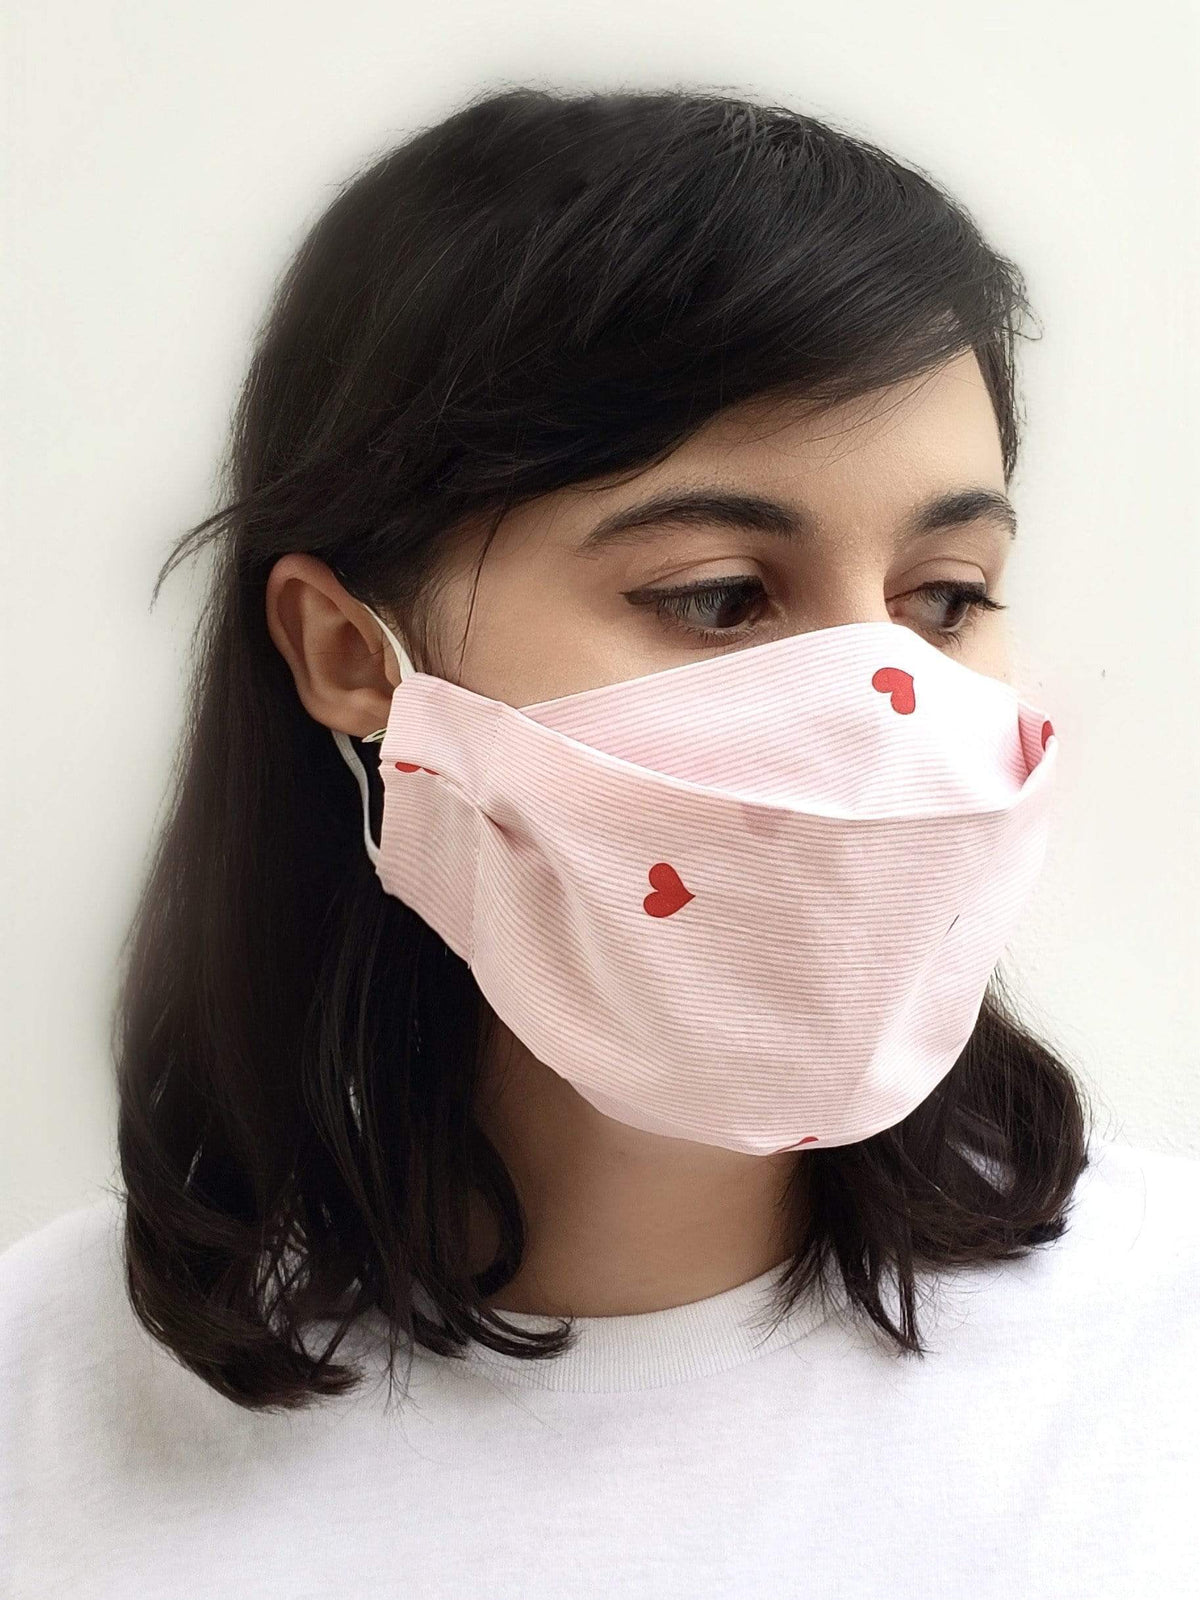 Box Pleated Face Masks True White Cotton (Box Pleated Mask with Filter Pocket) - Chloe Dao